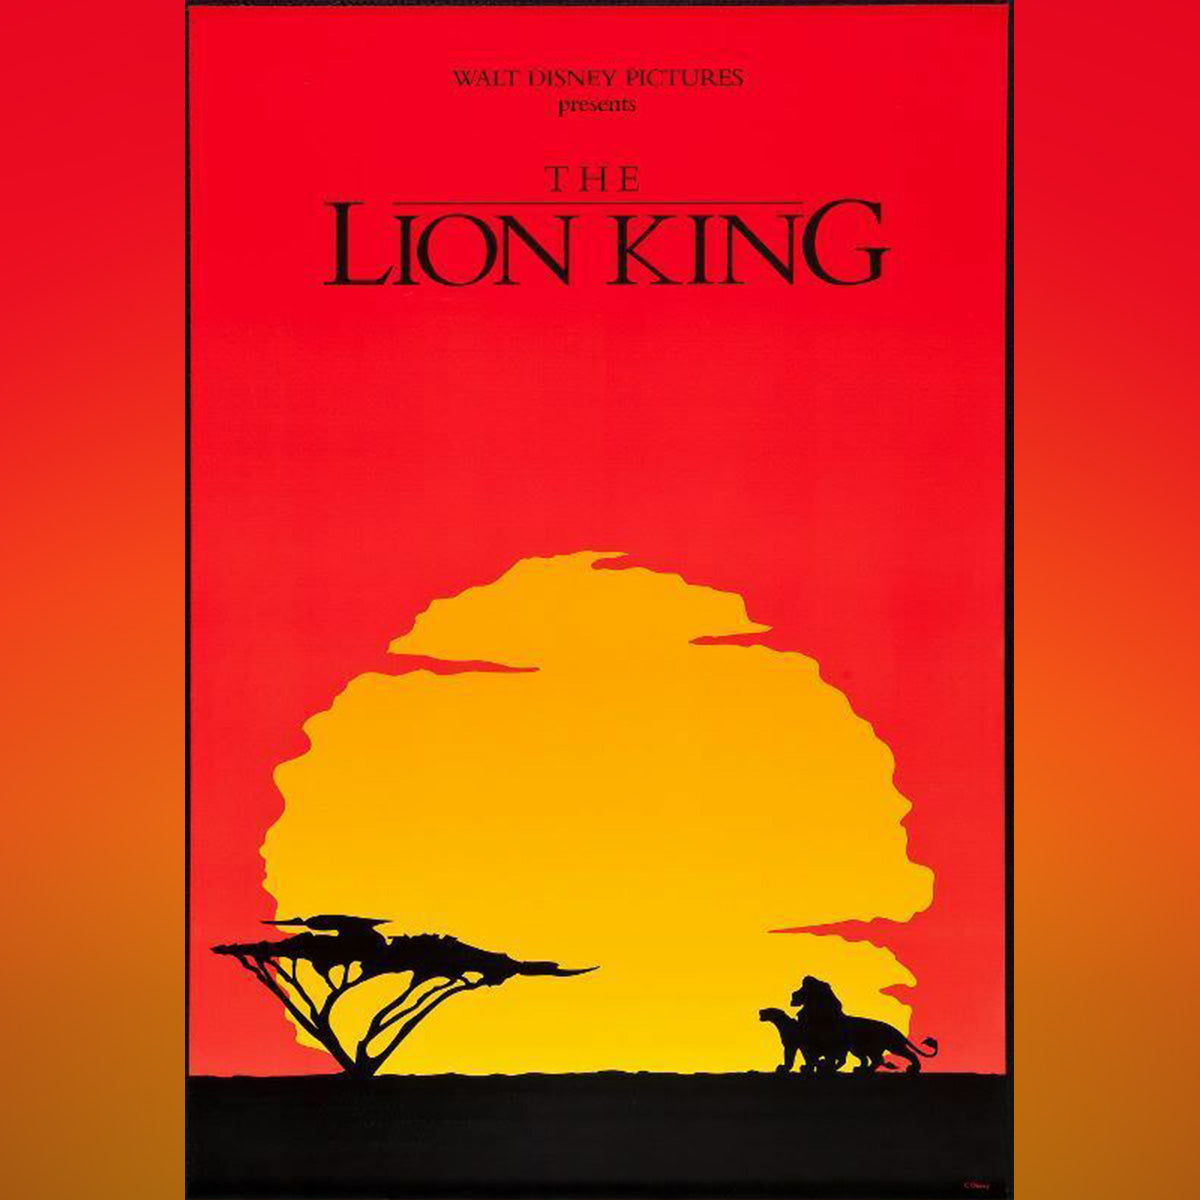 Original Movie Poster of The Lion King (1994)